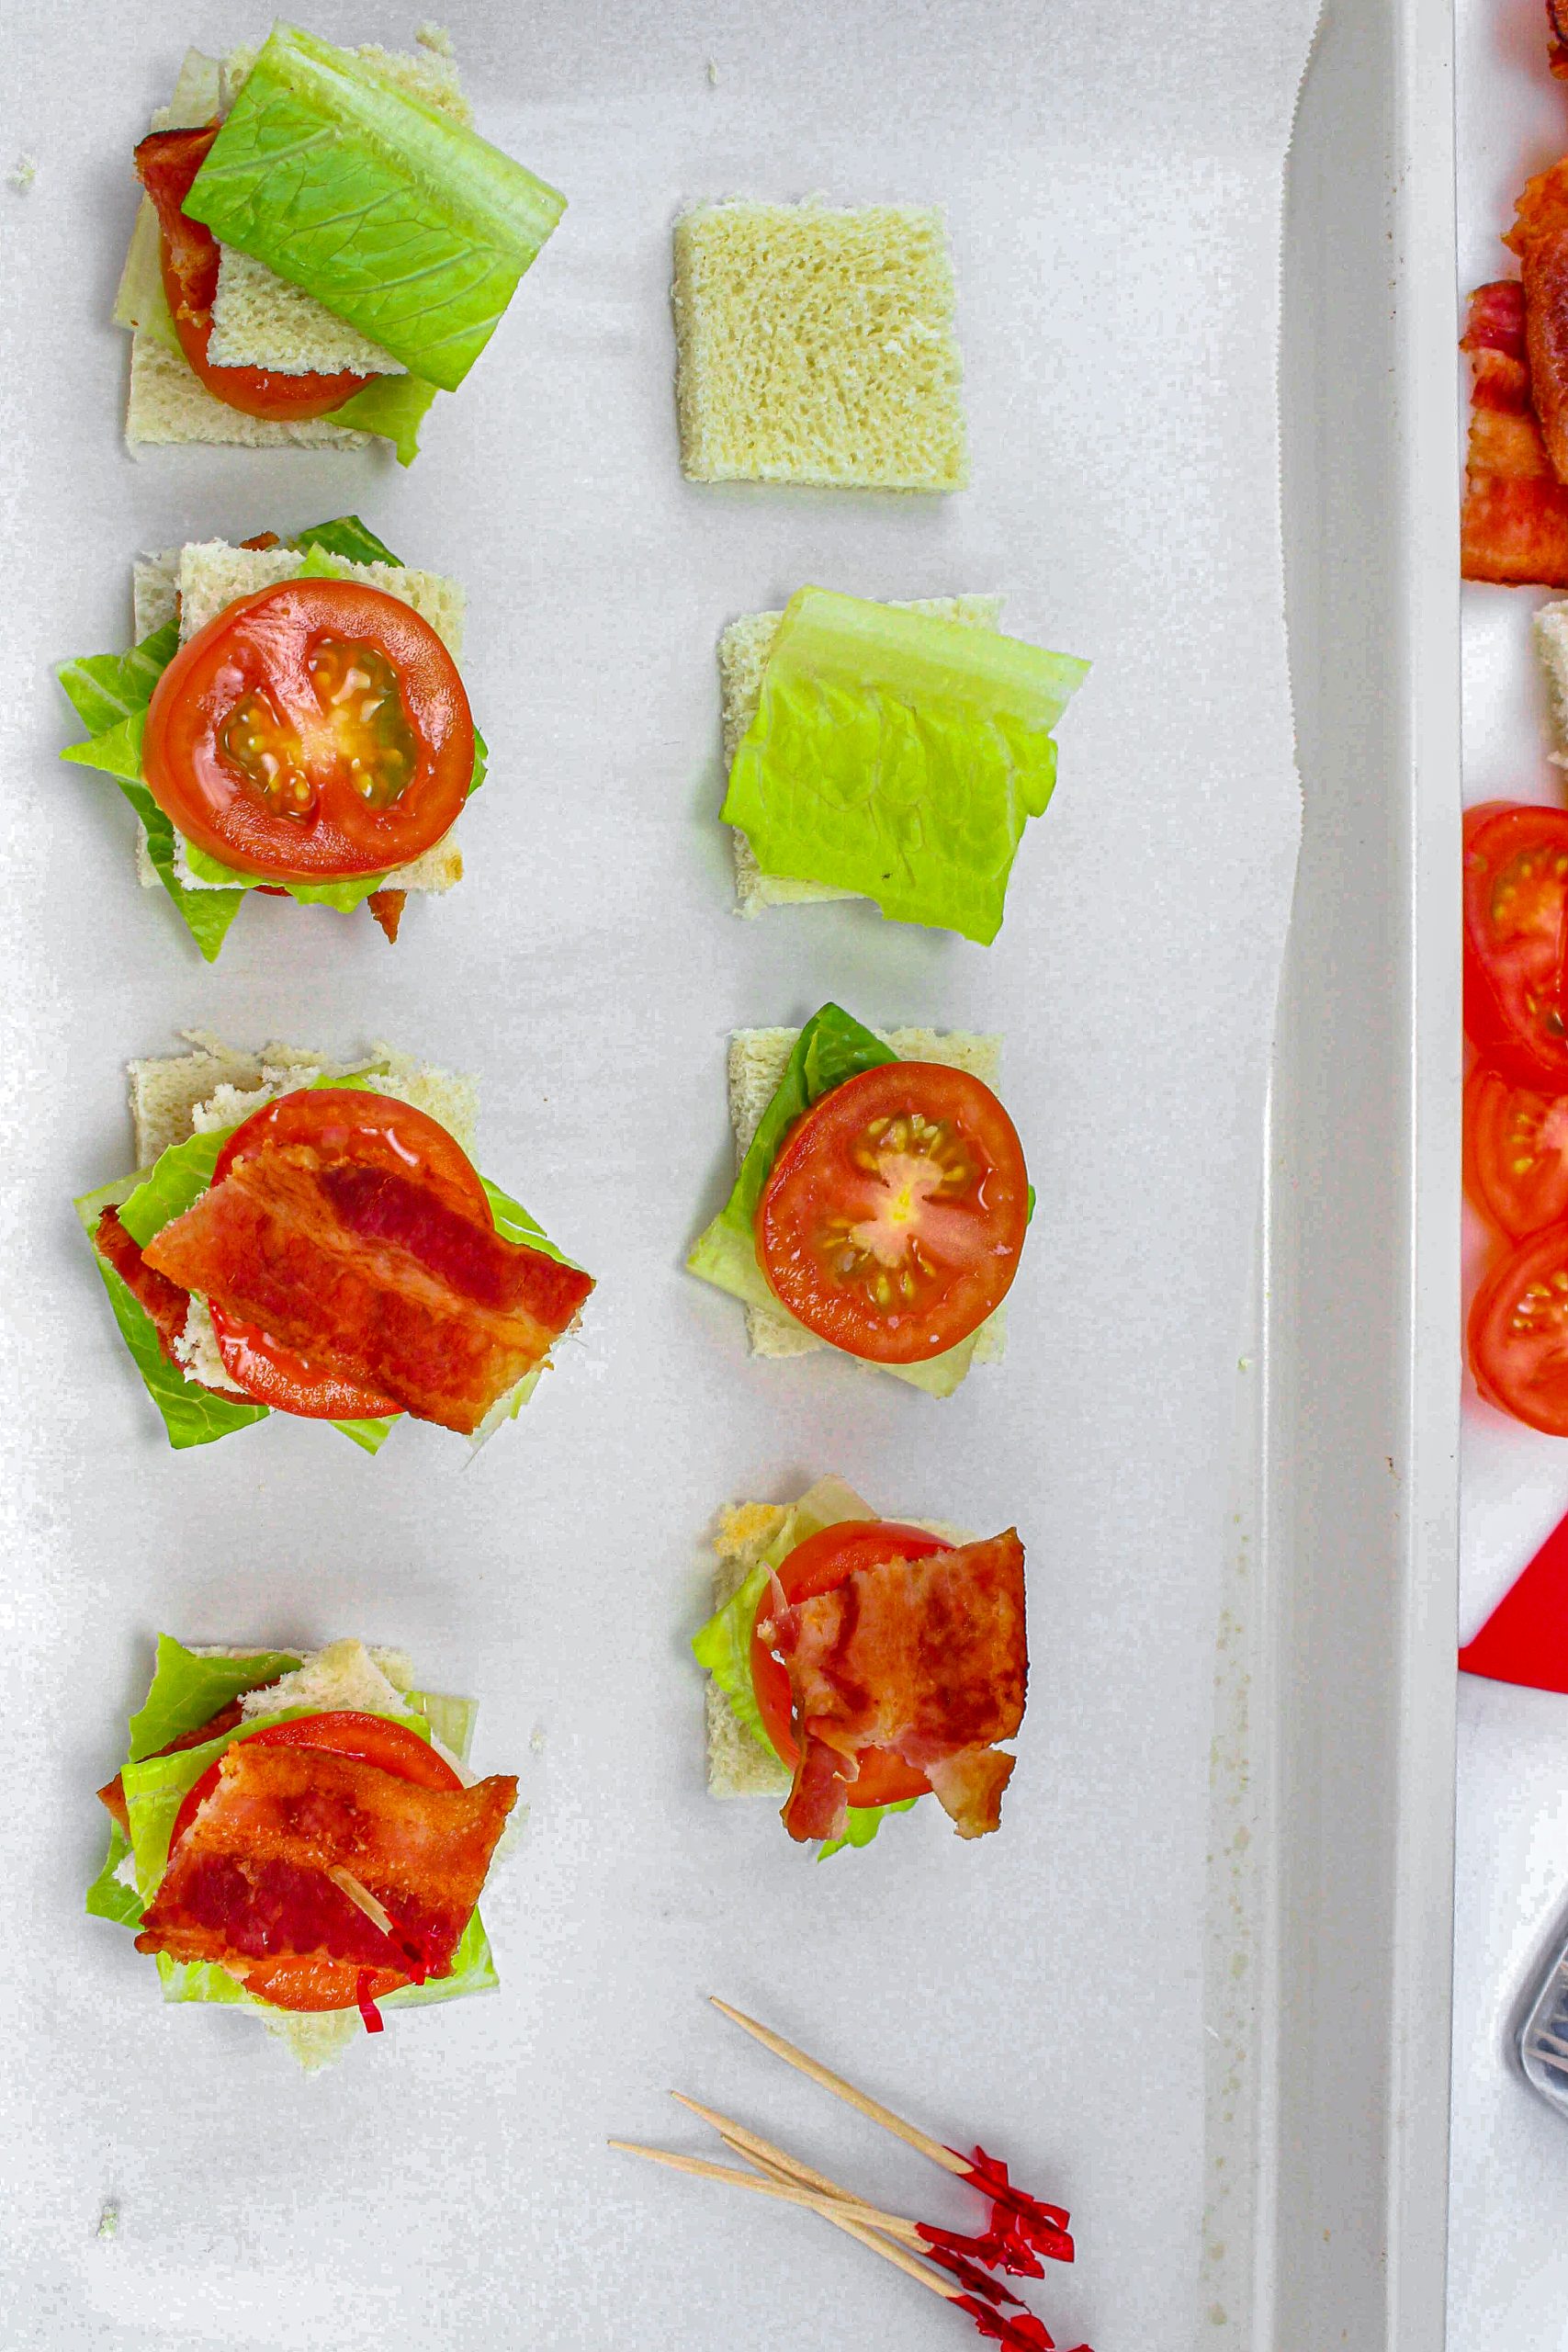 Lay out 16 squares of bread and set a piece of lettuce on them followed by a tomato slice and piece of bacon.